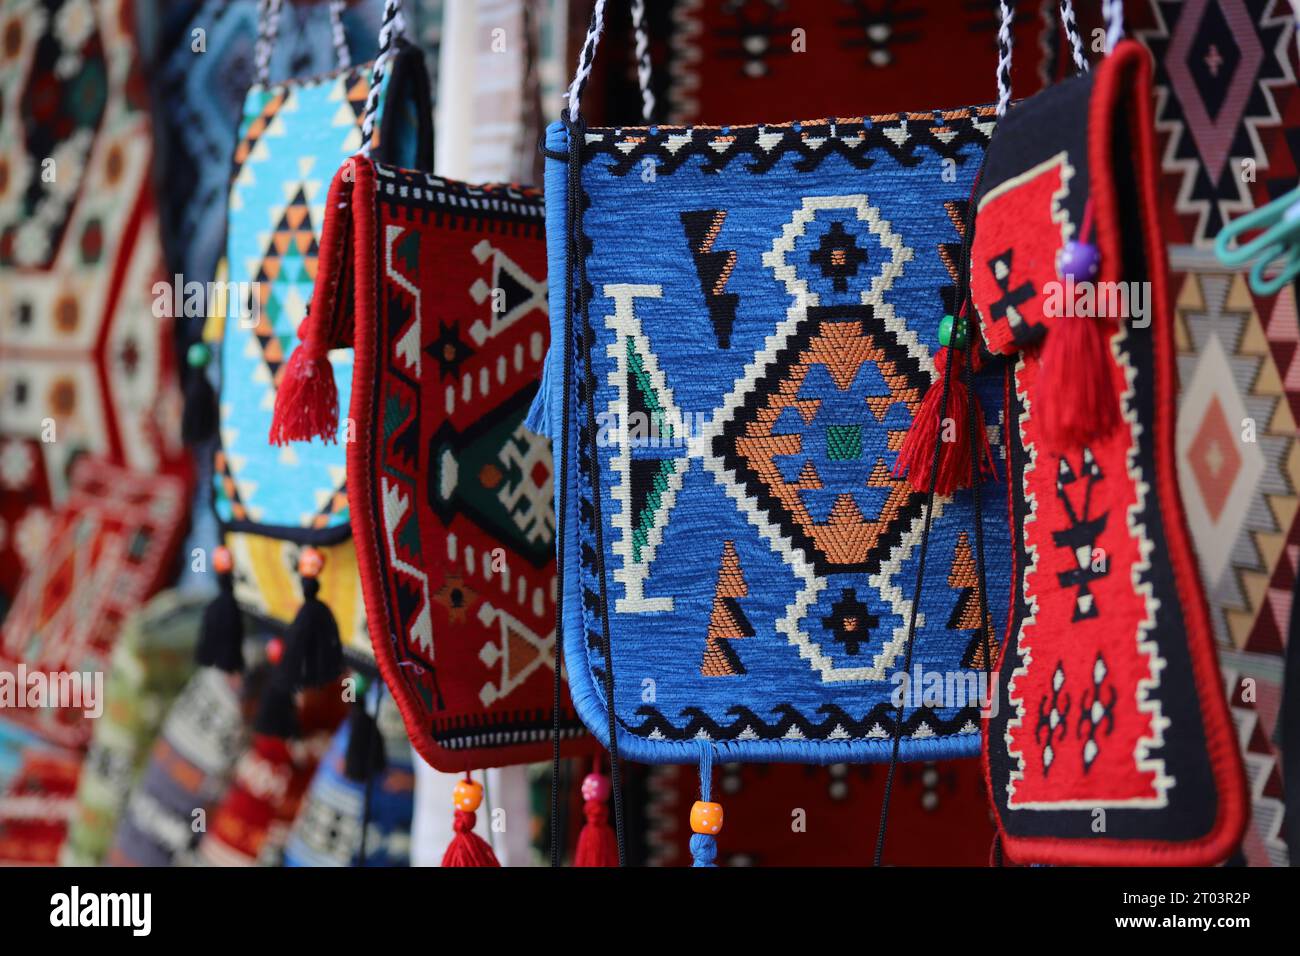 An uneven hanging row of bold mixed geometric patterned, multicoloured, ethnic look, Woven Carpet or Rug Style Shoulder Bags with Tassels and Beads. Stock Photo